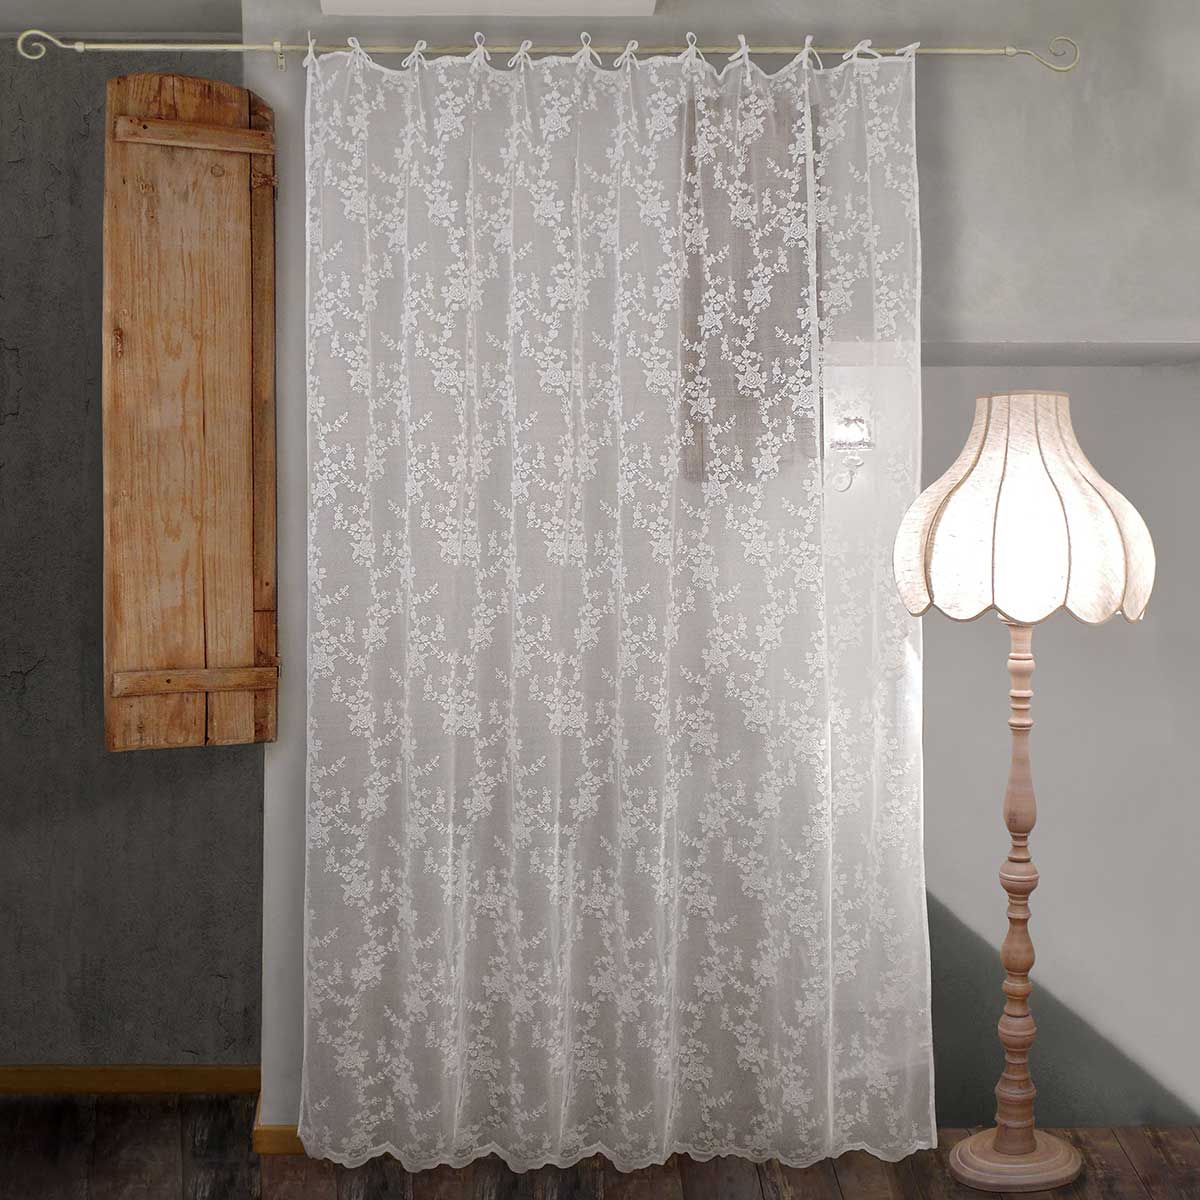 Shabby Chic Polyester-Spitzenvorhang 300 x 290 Poly-Ciel Collection Weiße Farbe